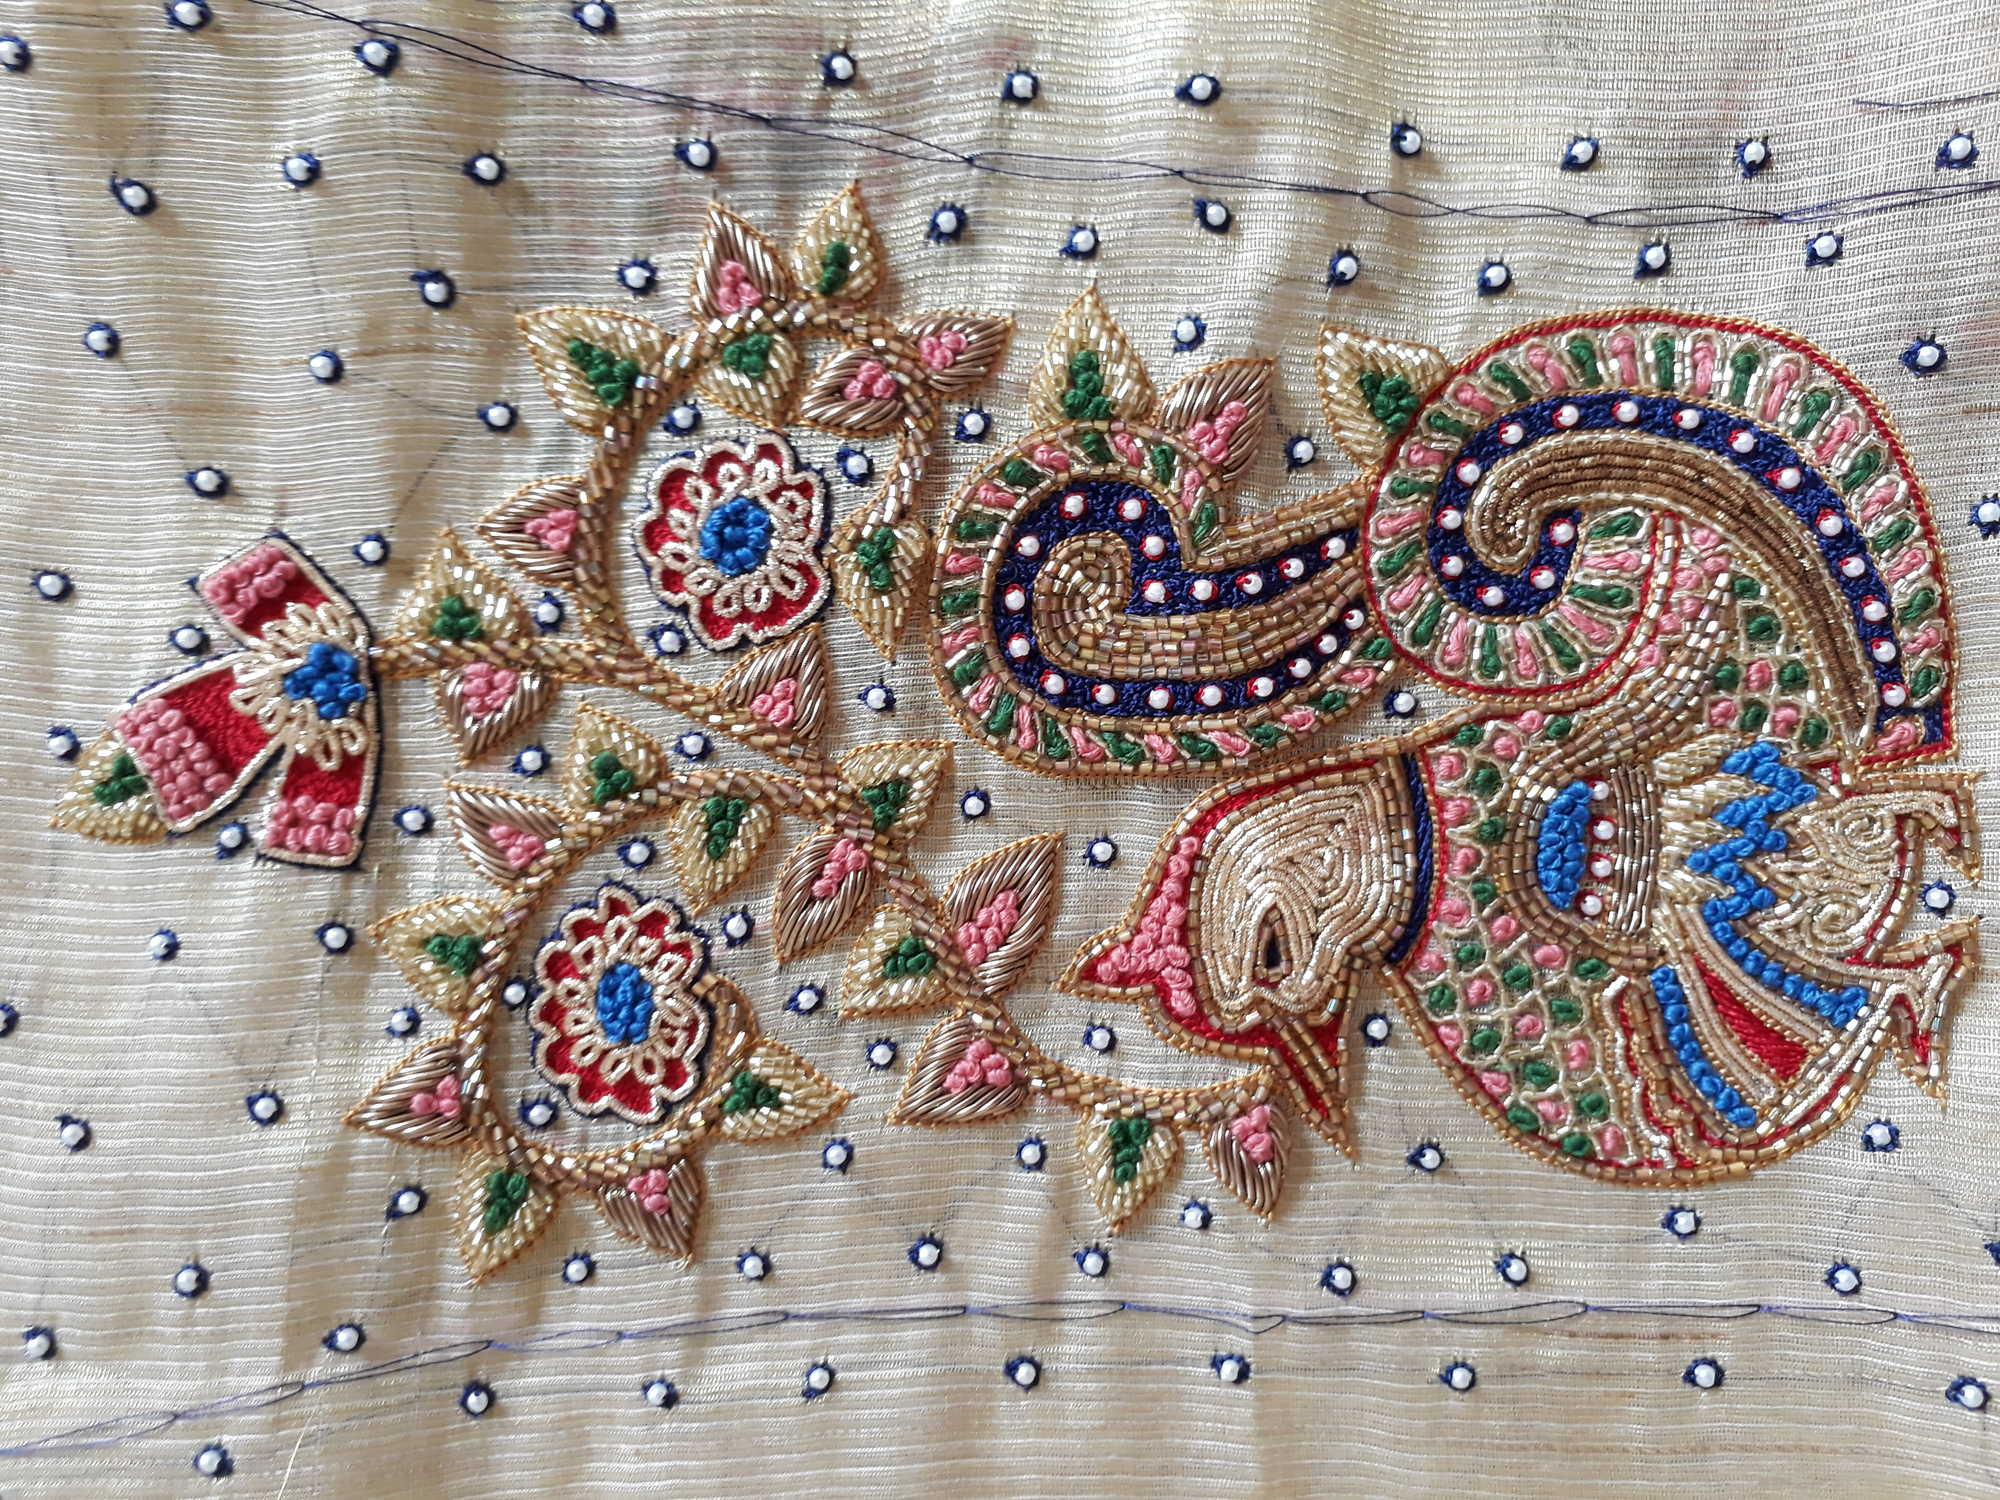 Western Embroidery Patterns Asr Hand Embroidery Govandi West Hand Work Embroidery Job Works